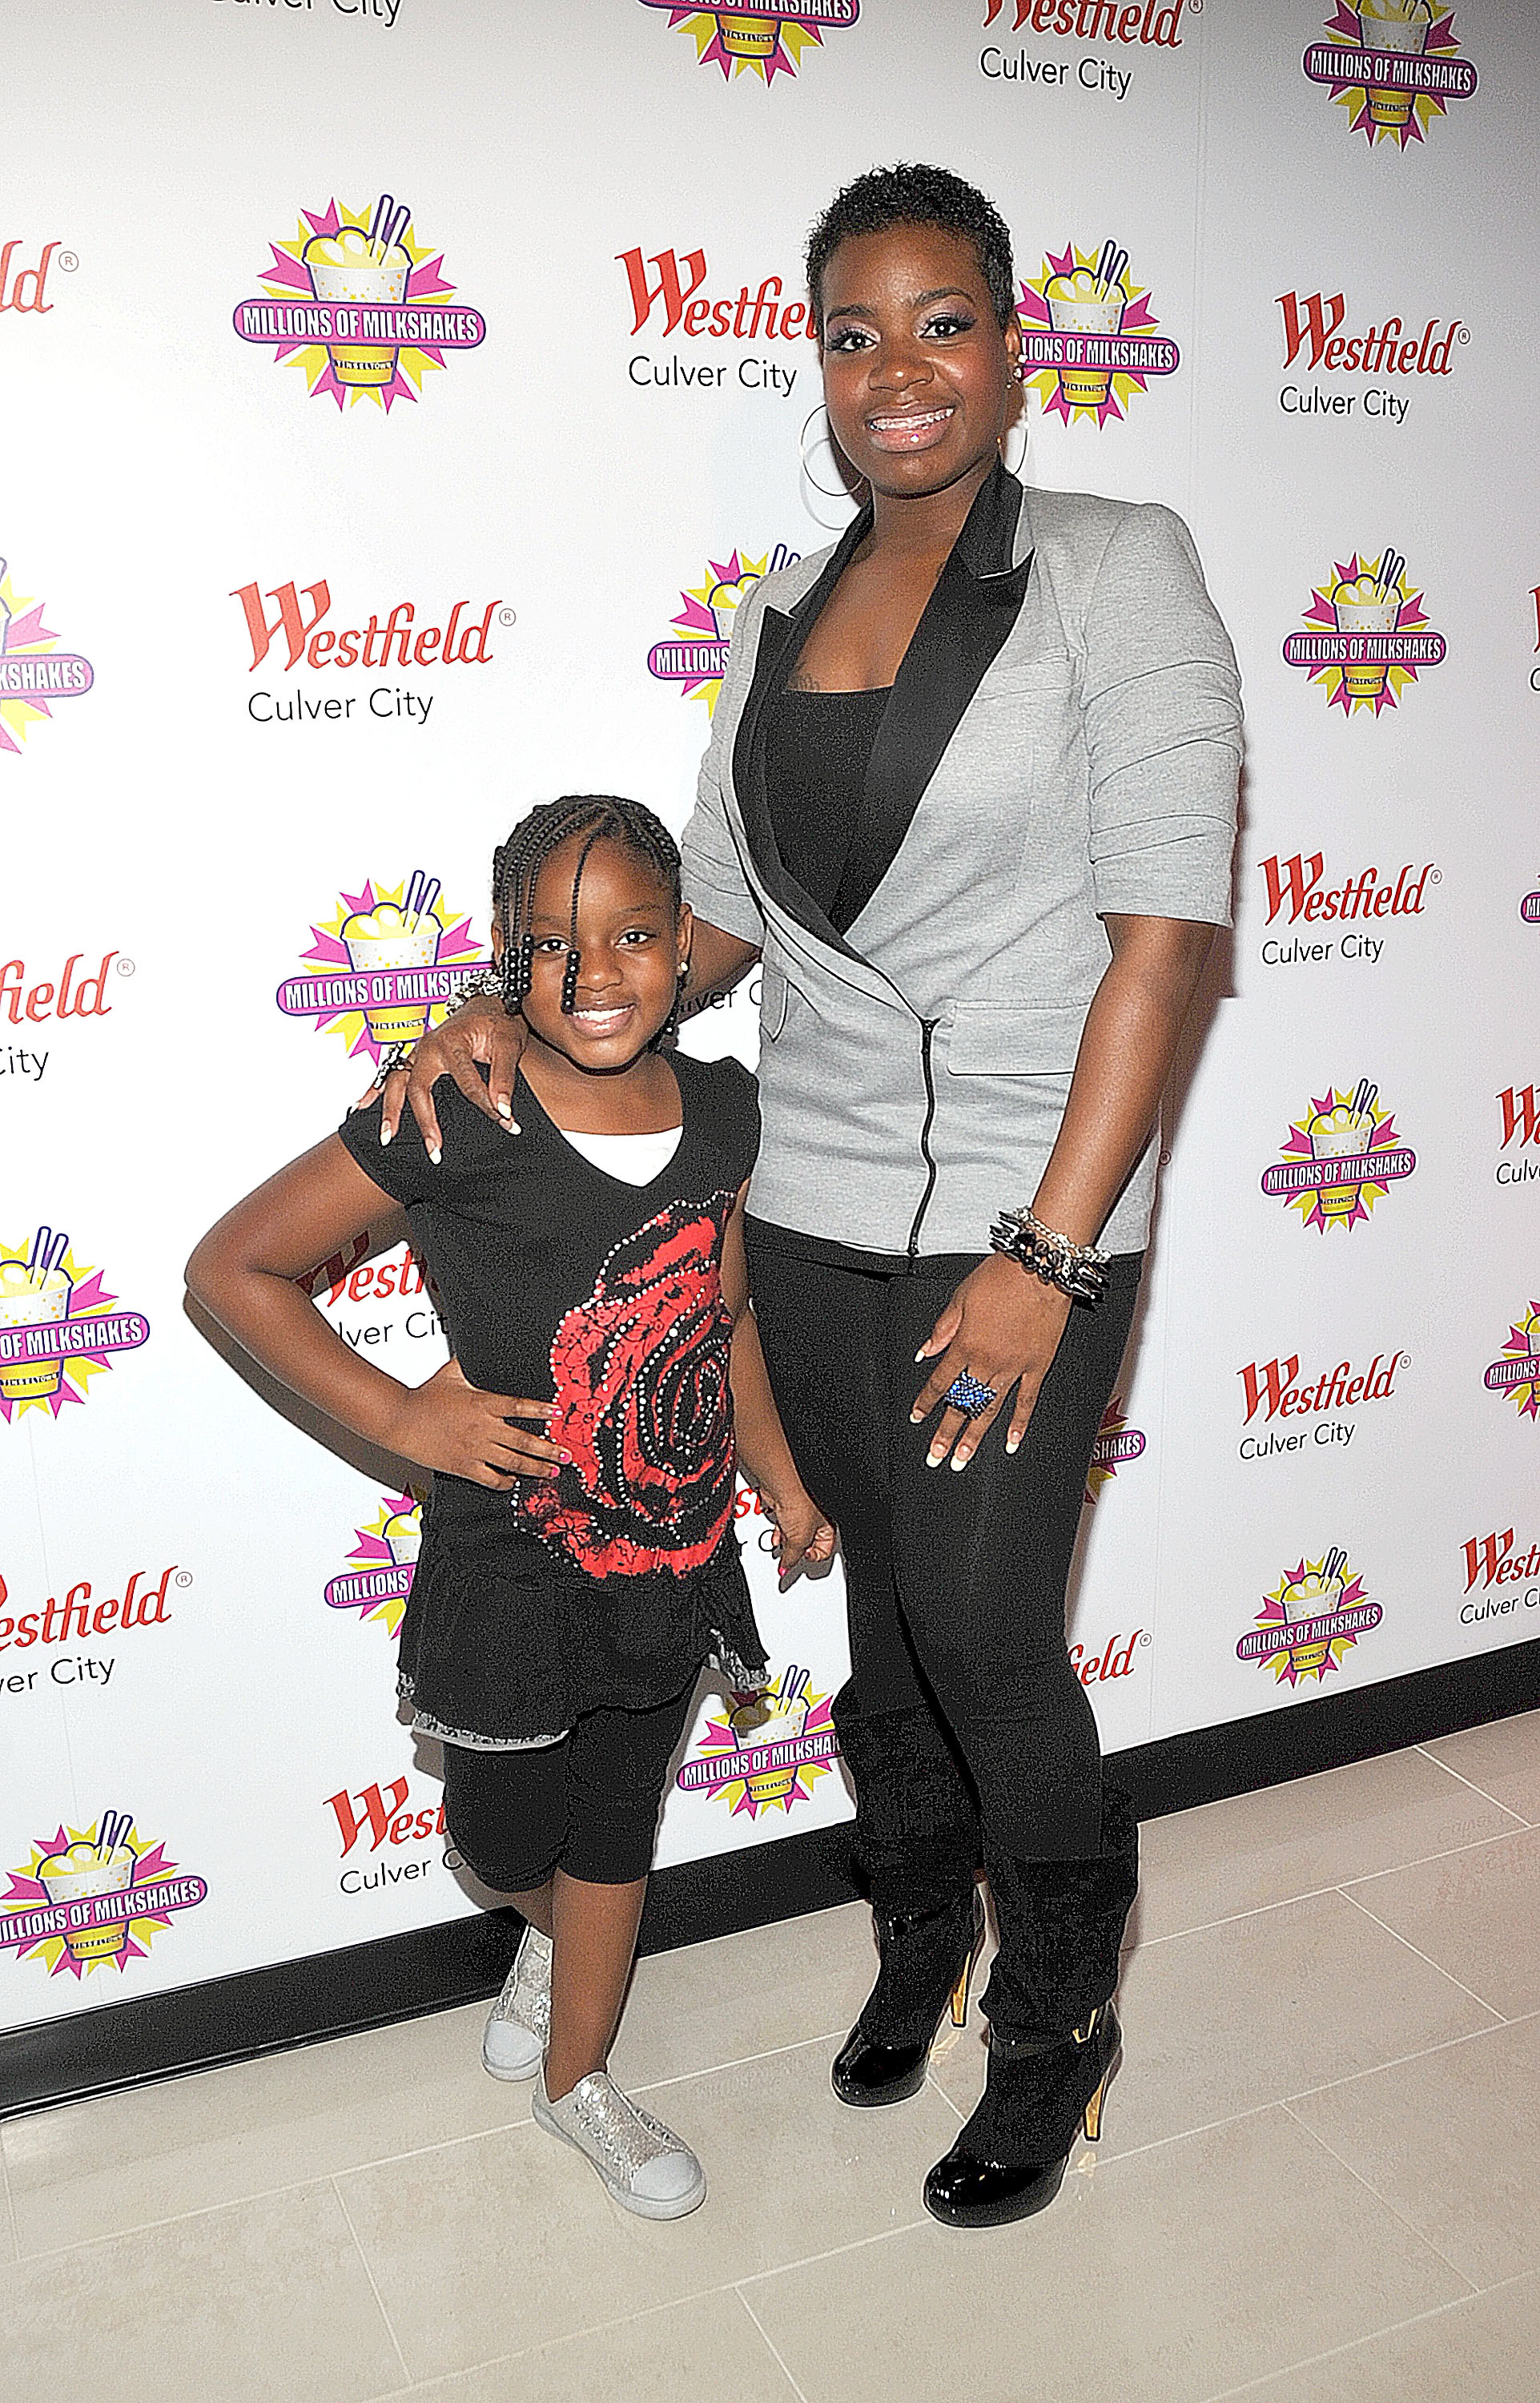 Fantasia Barrino stands with her daughter Zion Quari Barrino at a Millions of Milkshakes event. Fantasia wears a gray blazer and black shirt, Zion wears a black outfit with a rose design